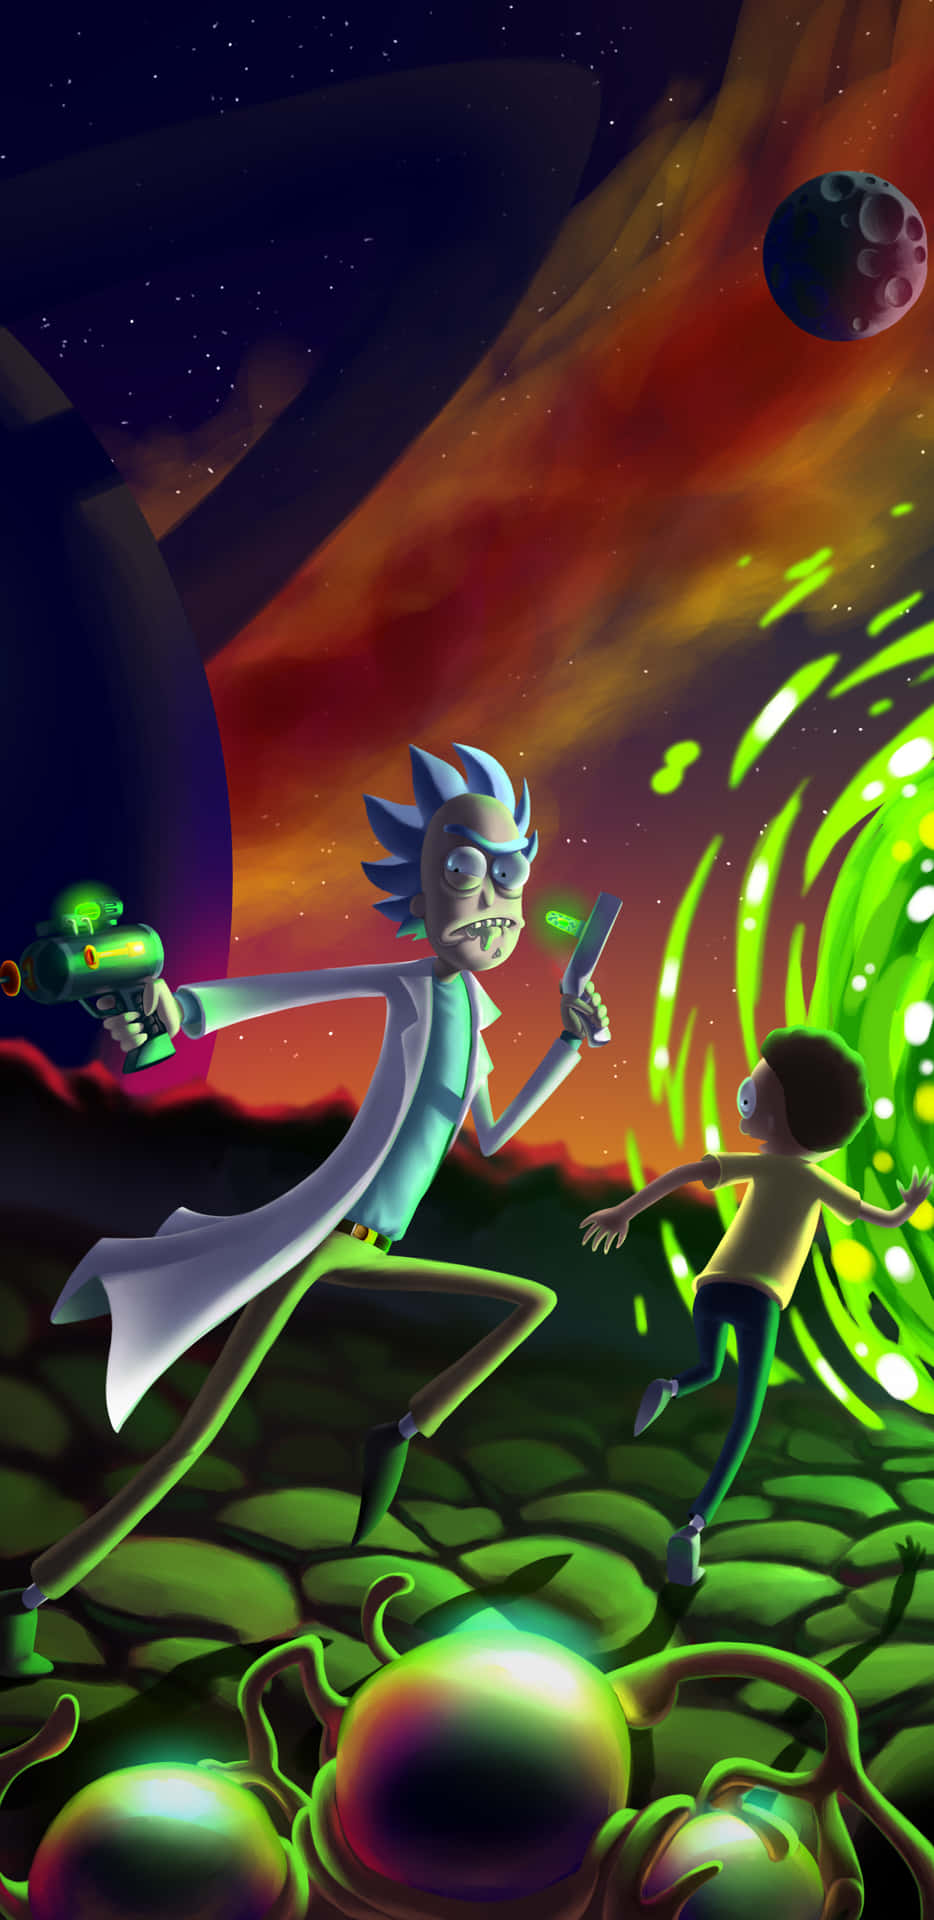 Get ready to feel the wonderful madness with Rick and Morty Fan Art. Wallpaper